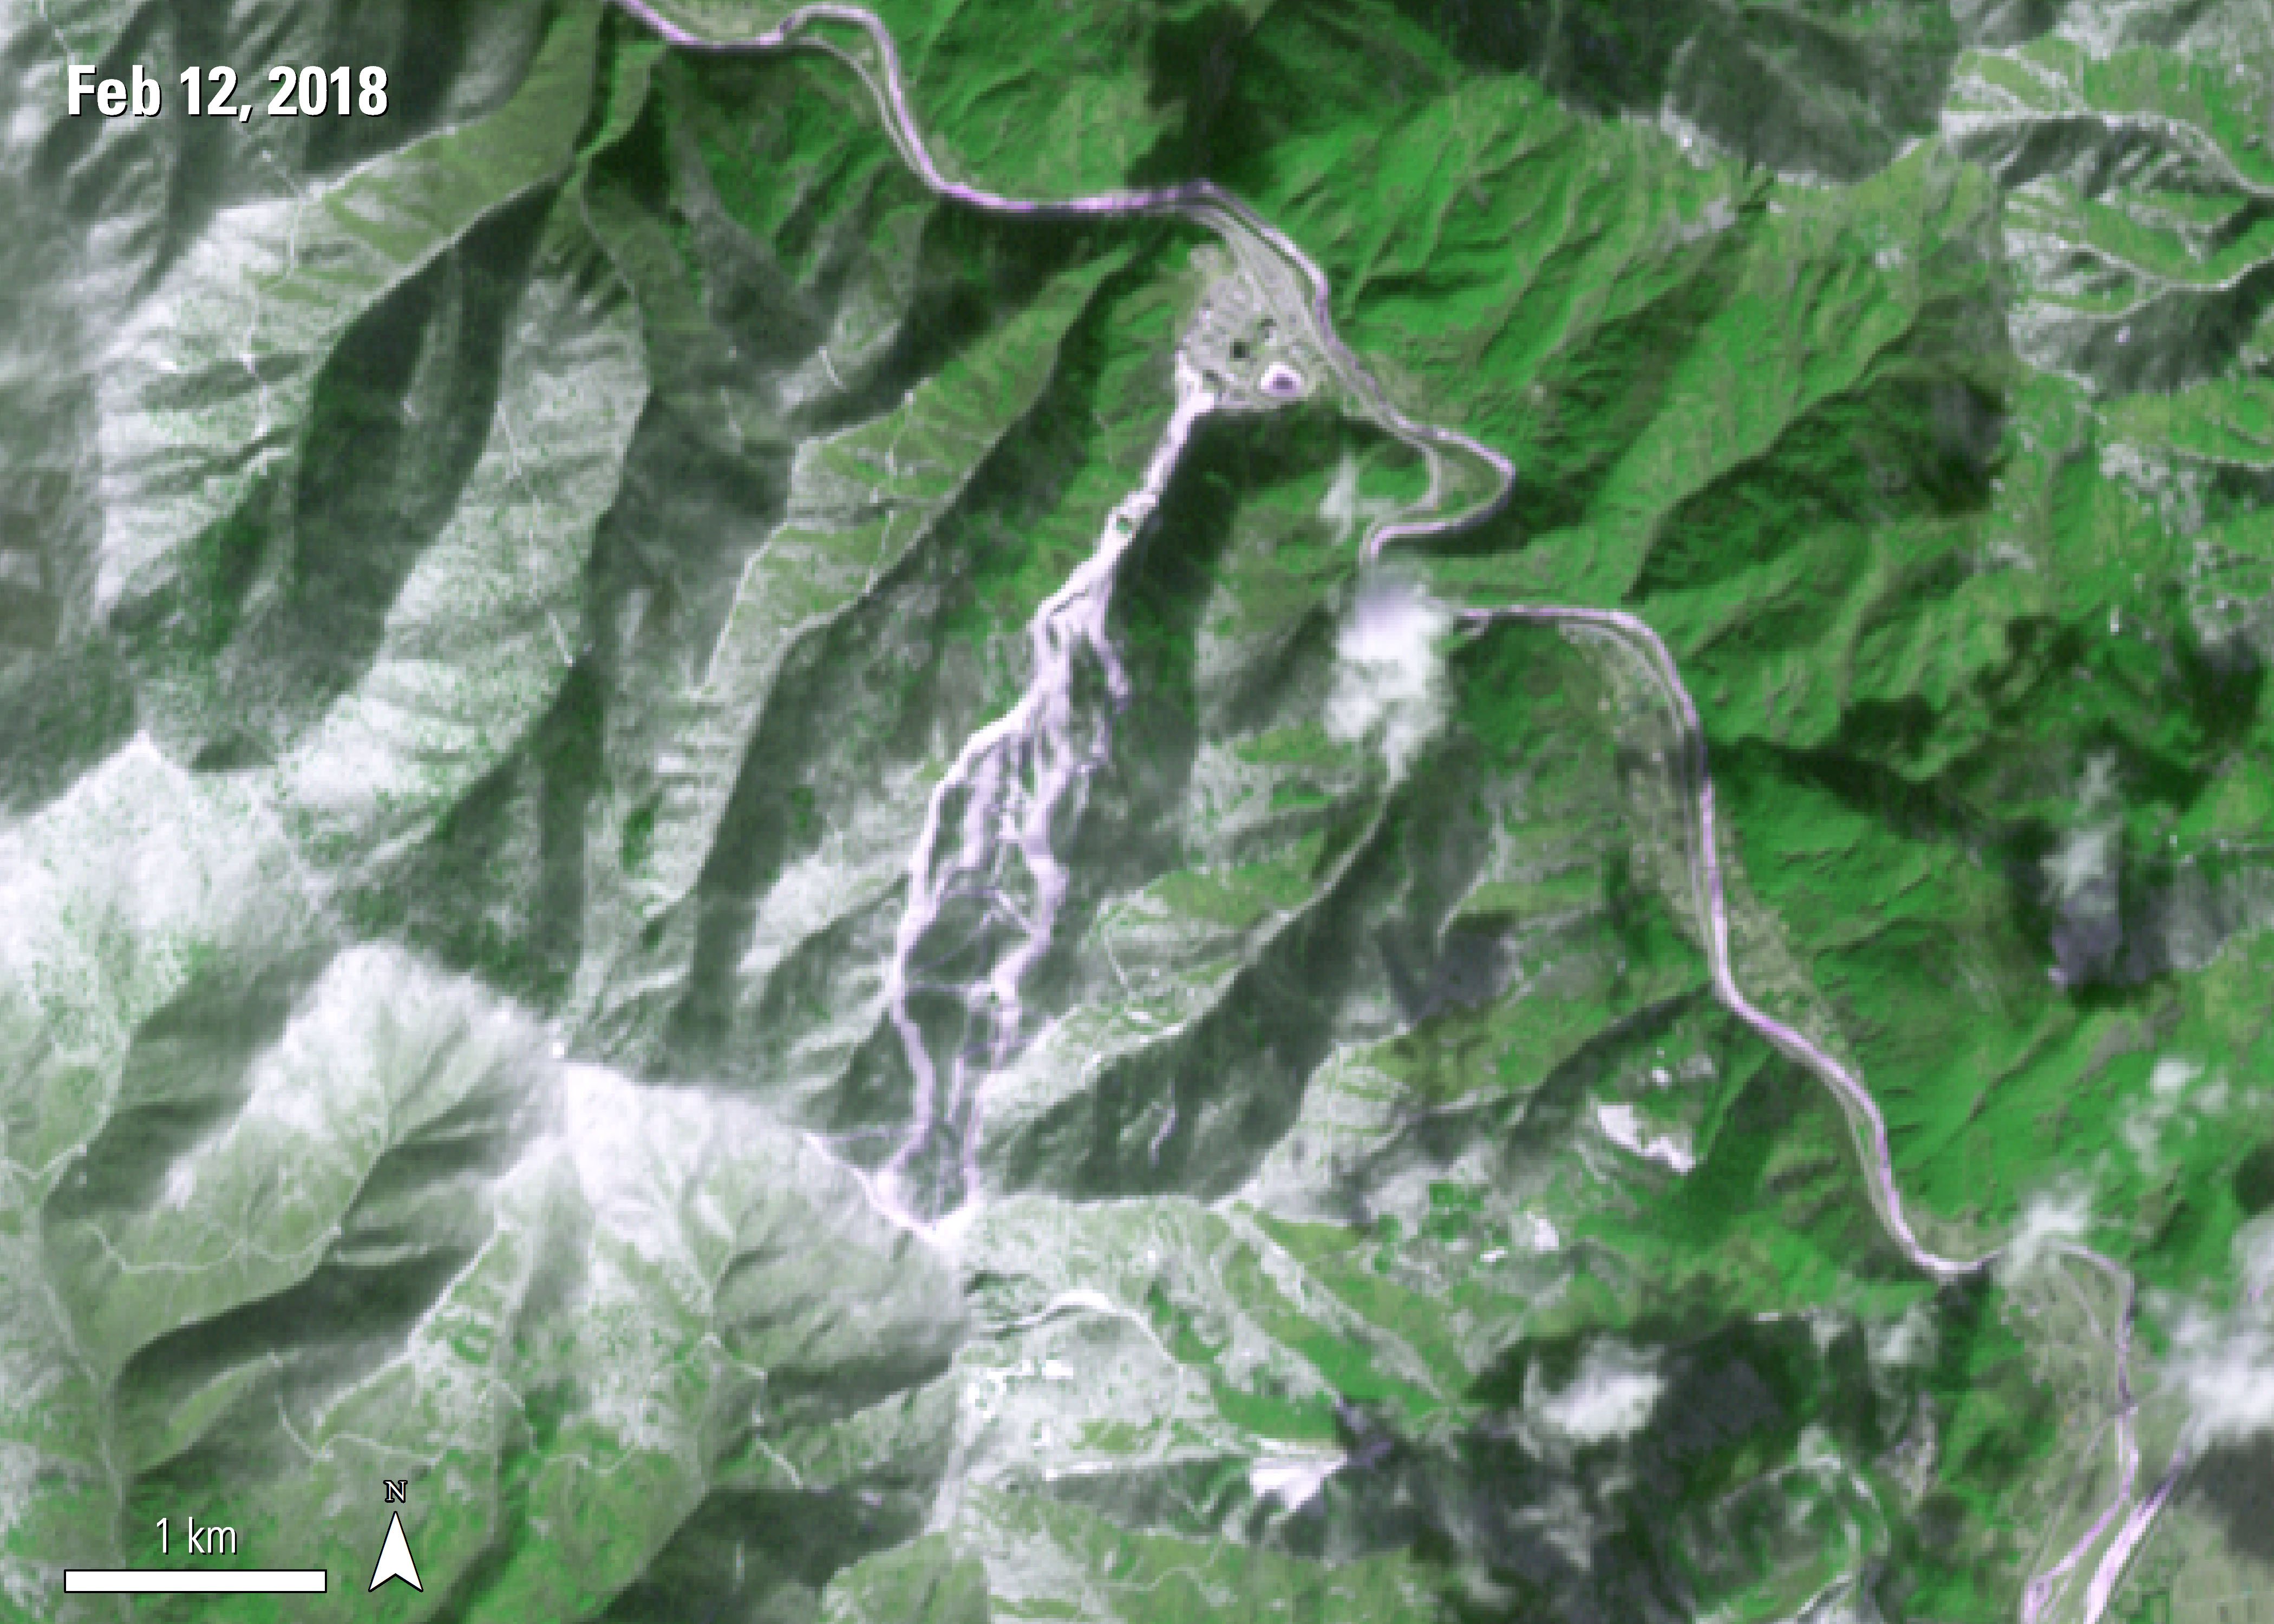 Top down view of Terra ASTER surface reflectance imagery of the ski slope during the 2018 Winter Olympics on Mount Garwing, Pyeongchange, South Korea, acquired February 12, 2018.